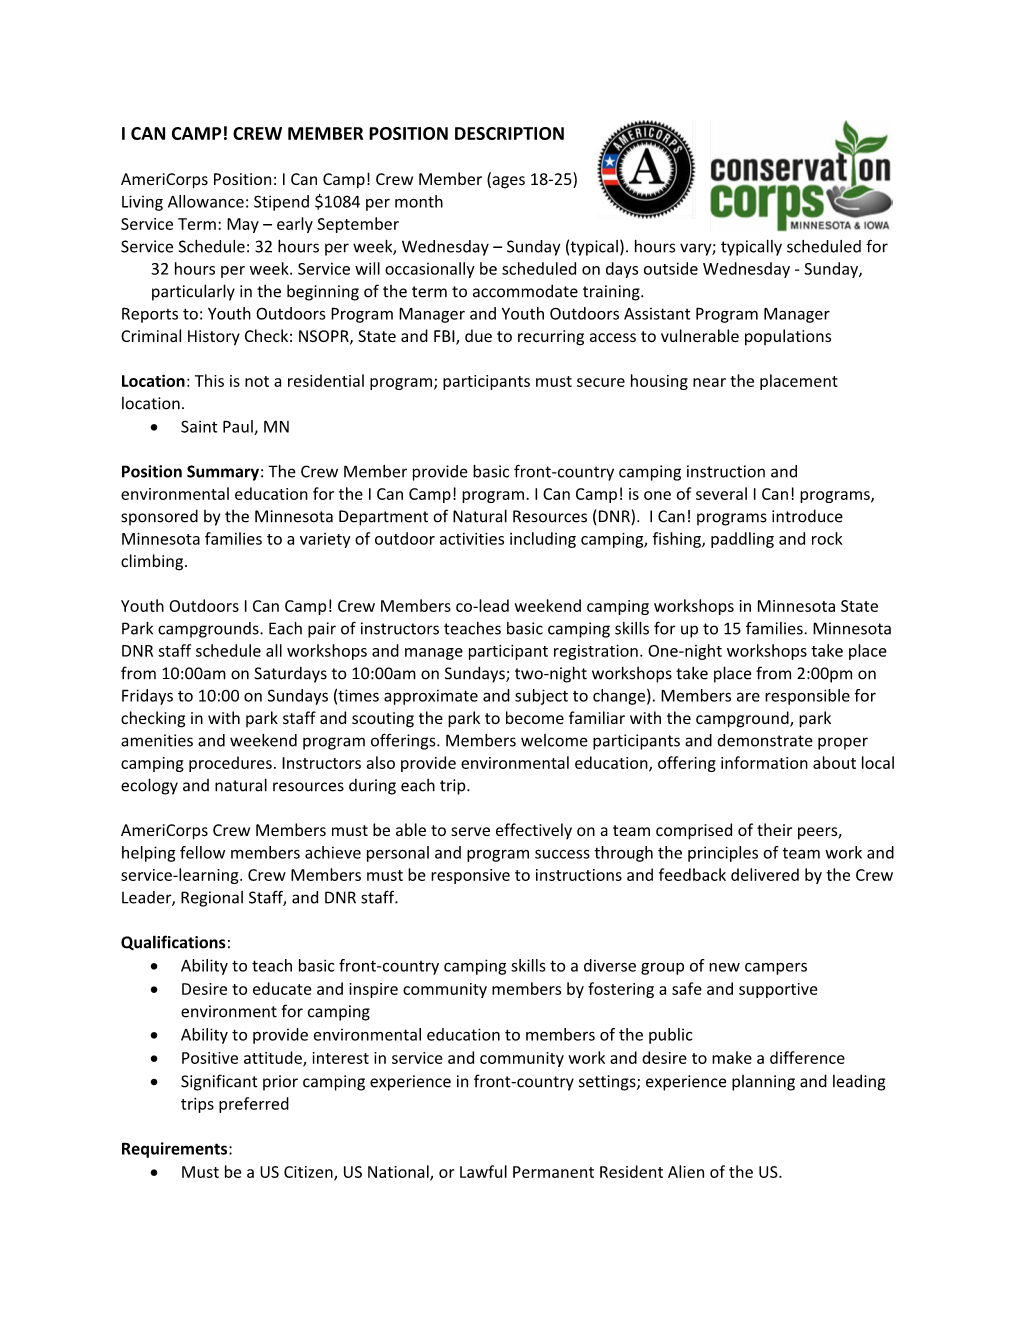 Americorps Position: I Can Camp! Crew Member(Ages 18-25)